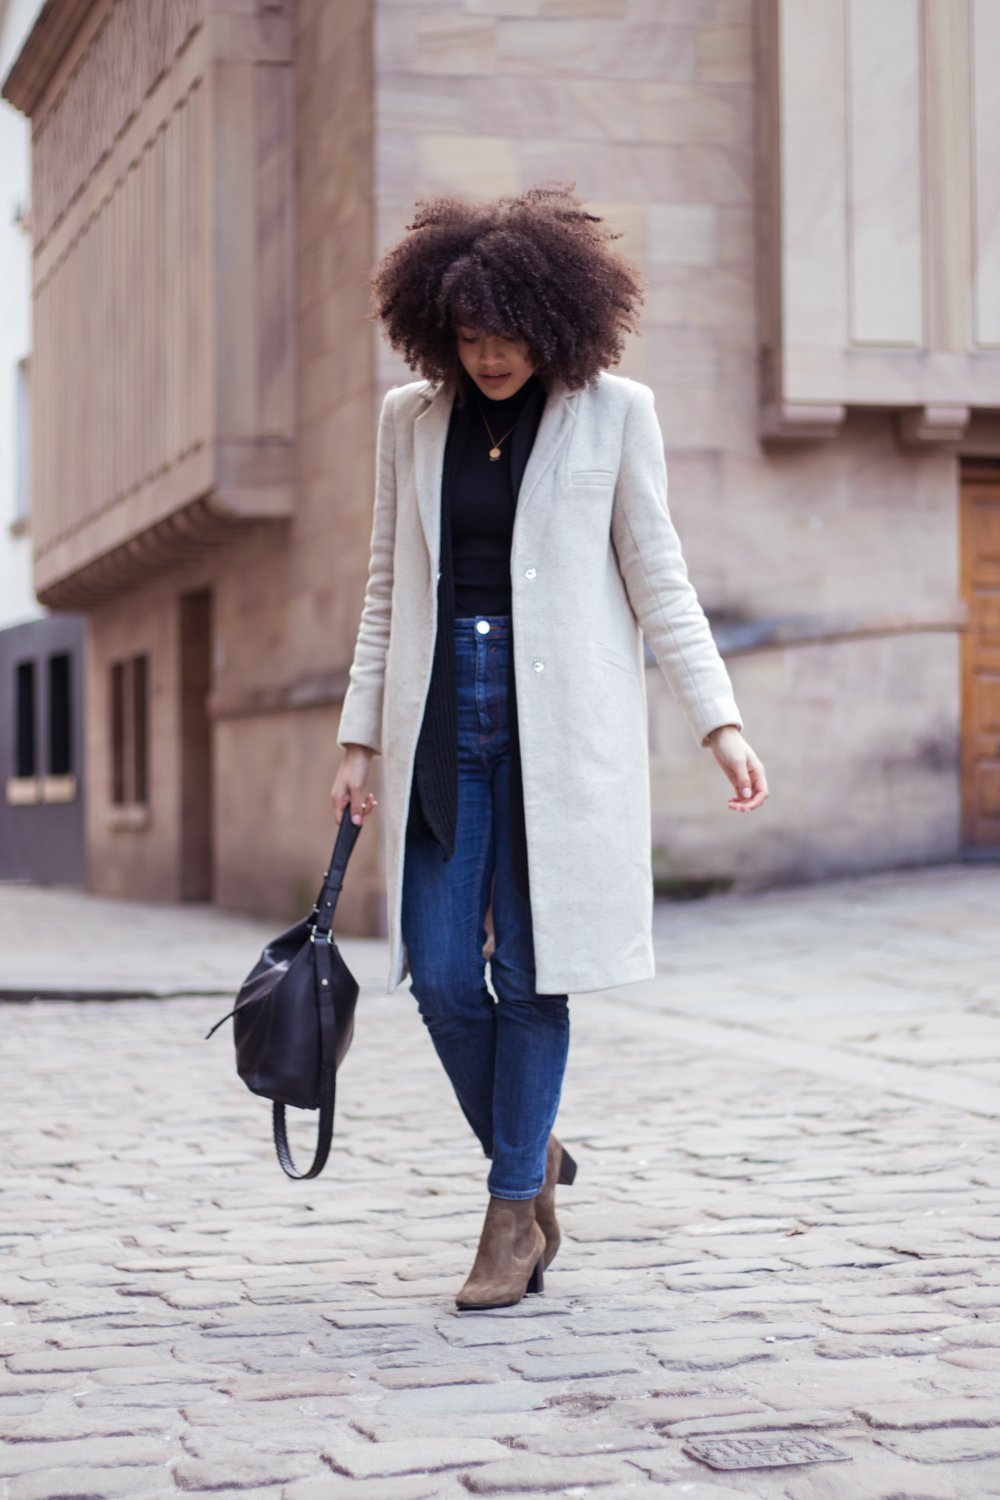 Minimal slim coat jeans and boots outfit